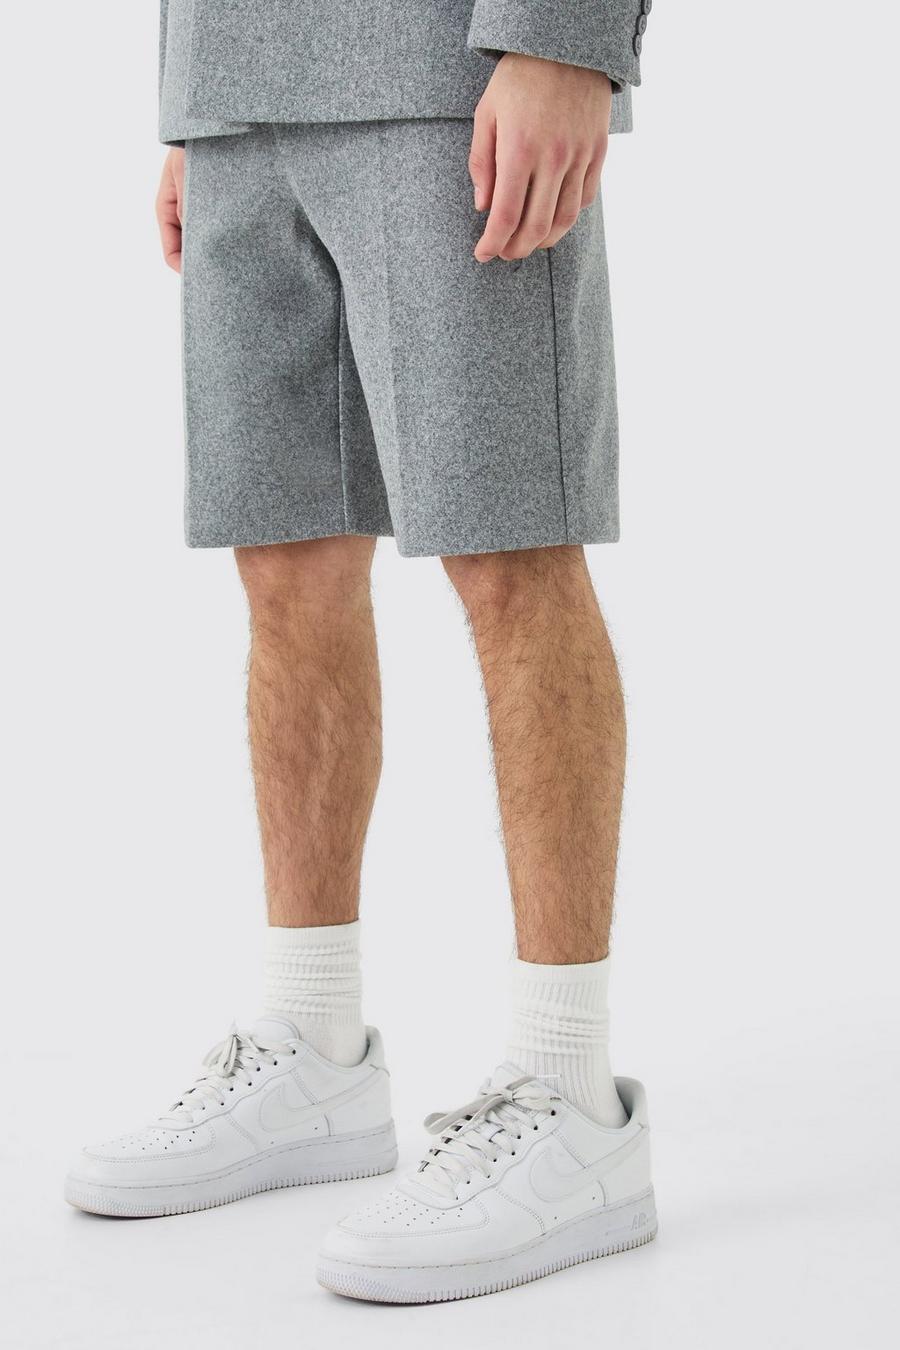 Grey Wool Look Tailored Shorts